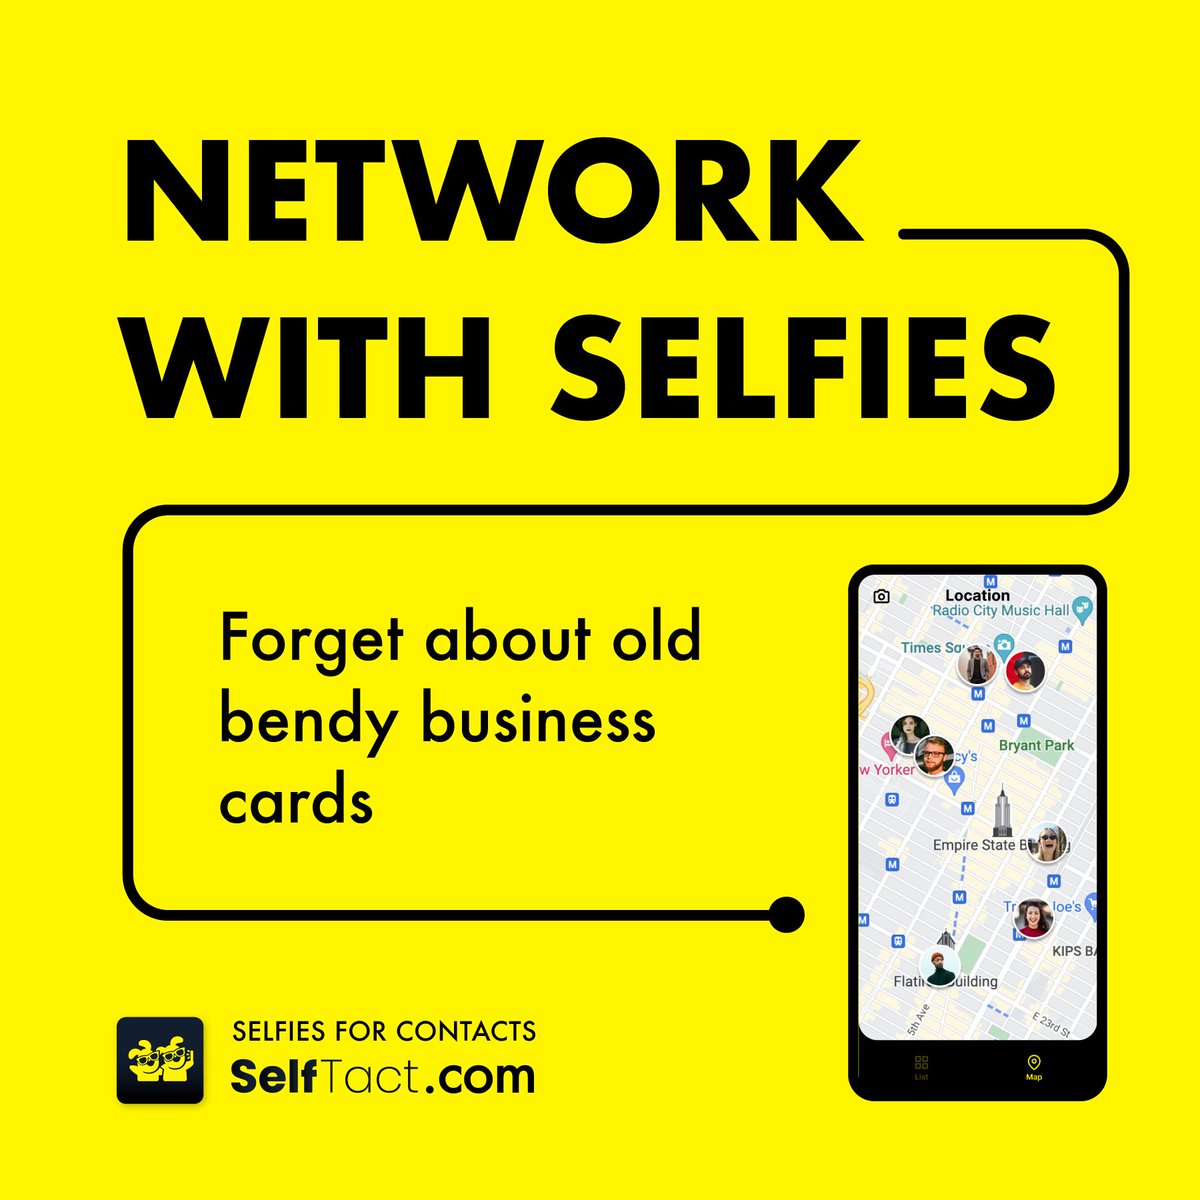 🤳 Snap, Send, Connect: Effortlessly Collect Contacts with a Smart Selfie!  ⭐ 
.
.
.
.
.
.
#SmartSelfies #MobileAppRevolution #SelfiesForNetworking #NetworkingSolution #BusinessGrowth #SmartNetworking #FutureOfNetworking #BusinessCommunication